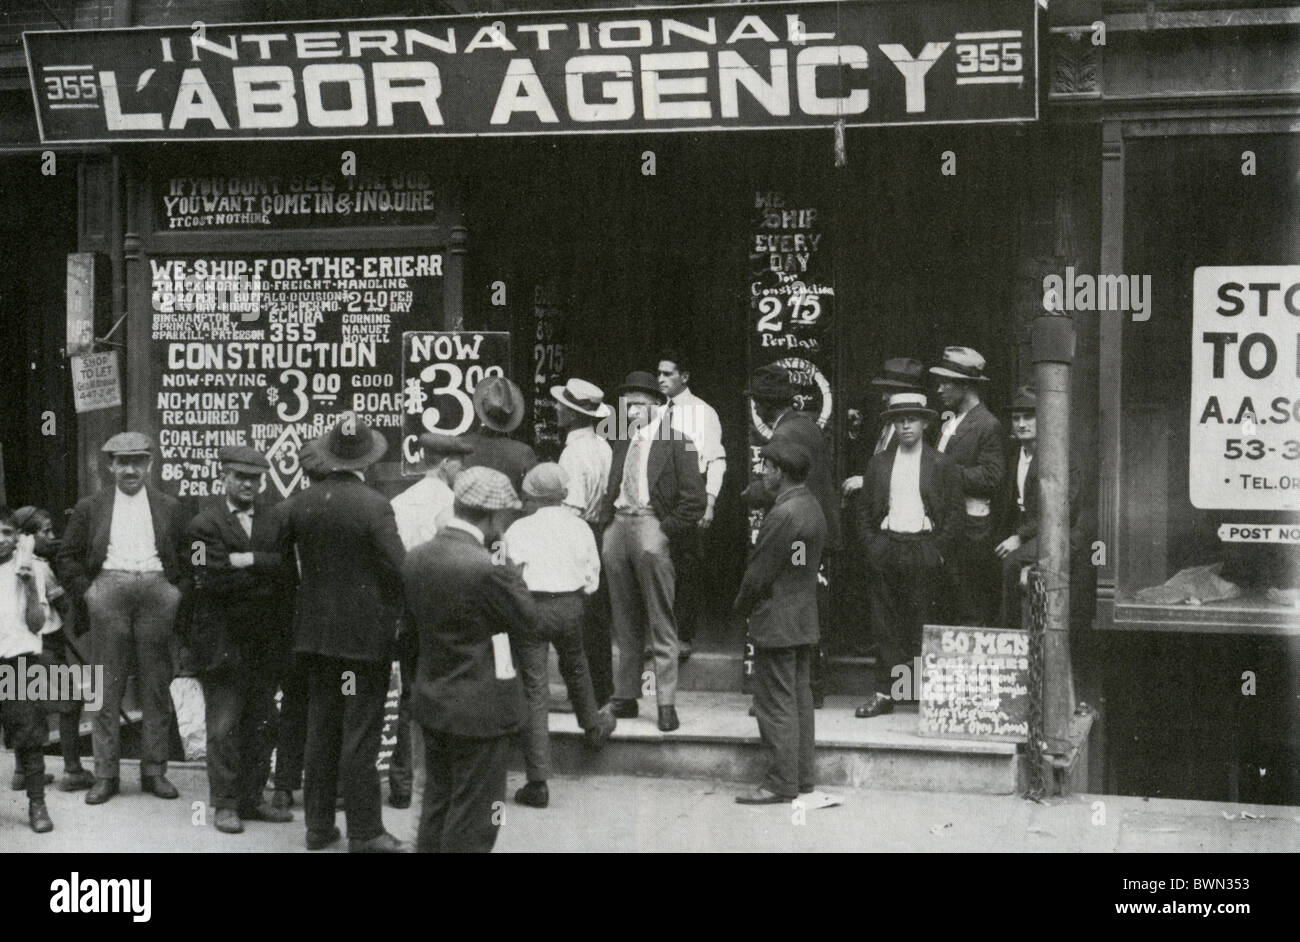 JOB AGENCY in New York, 1910. Most adverts relate to coal mining and construction. Photo by Lewis Hine Stock Photo